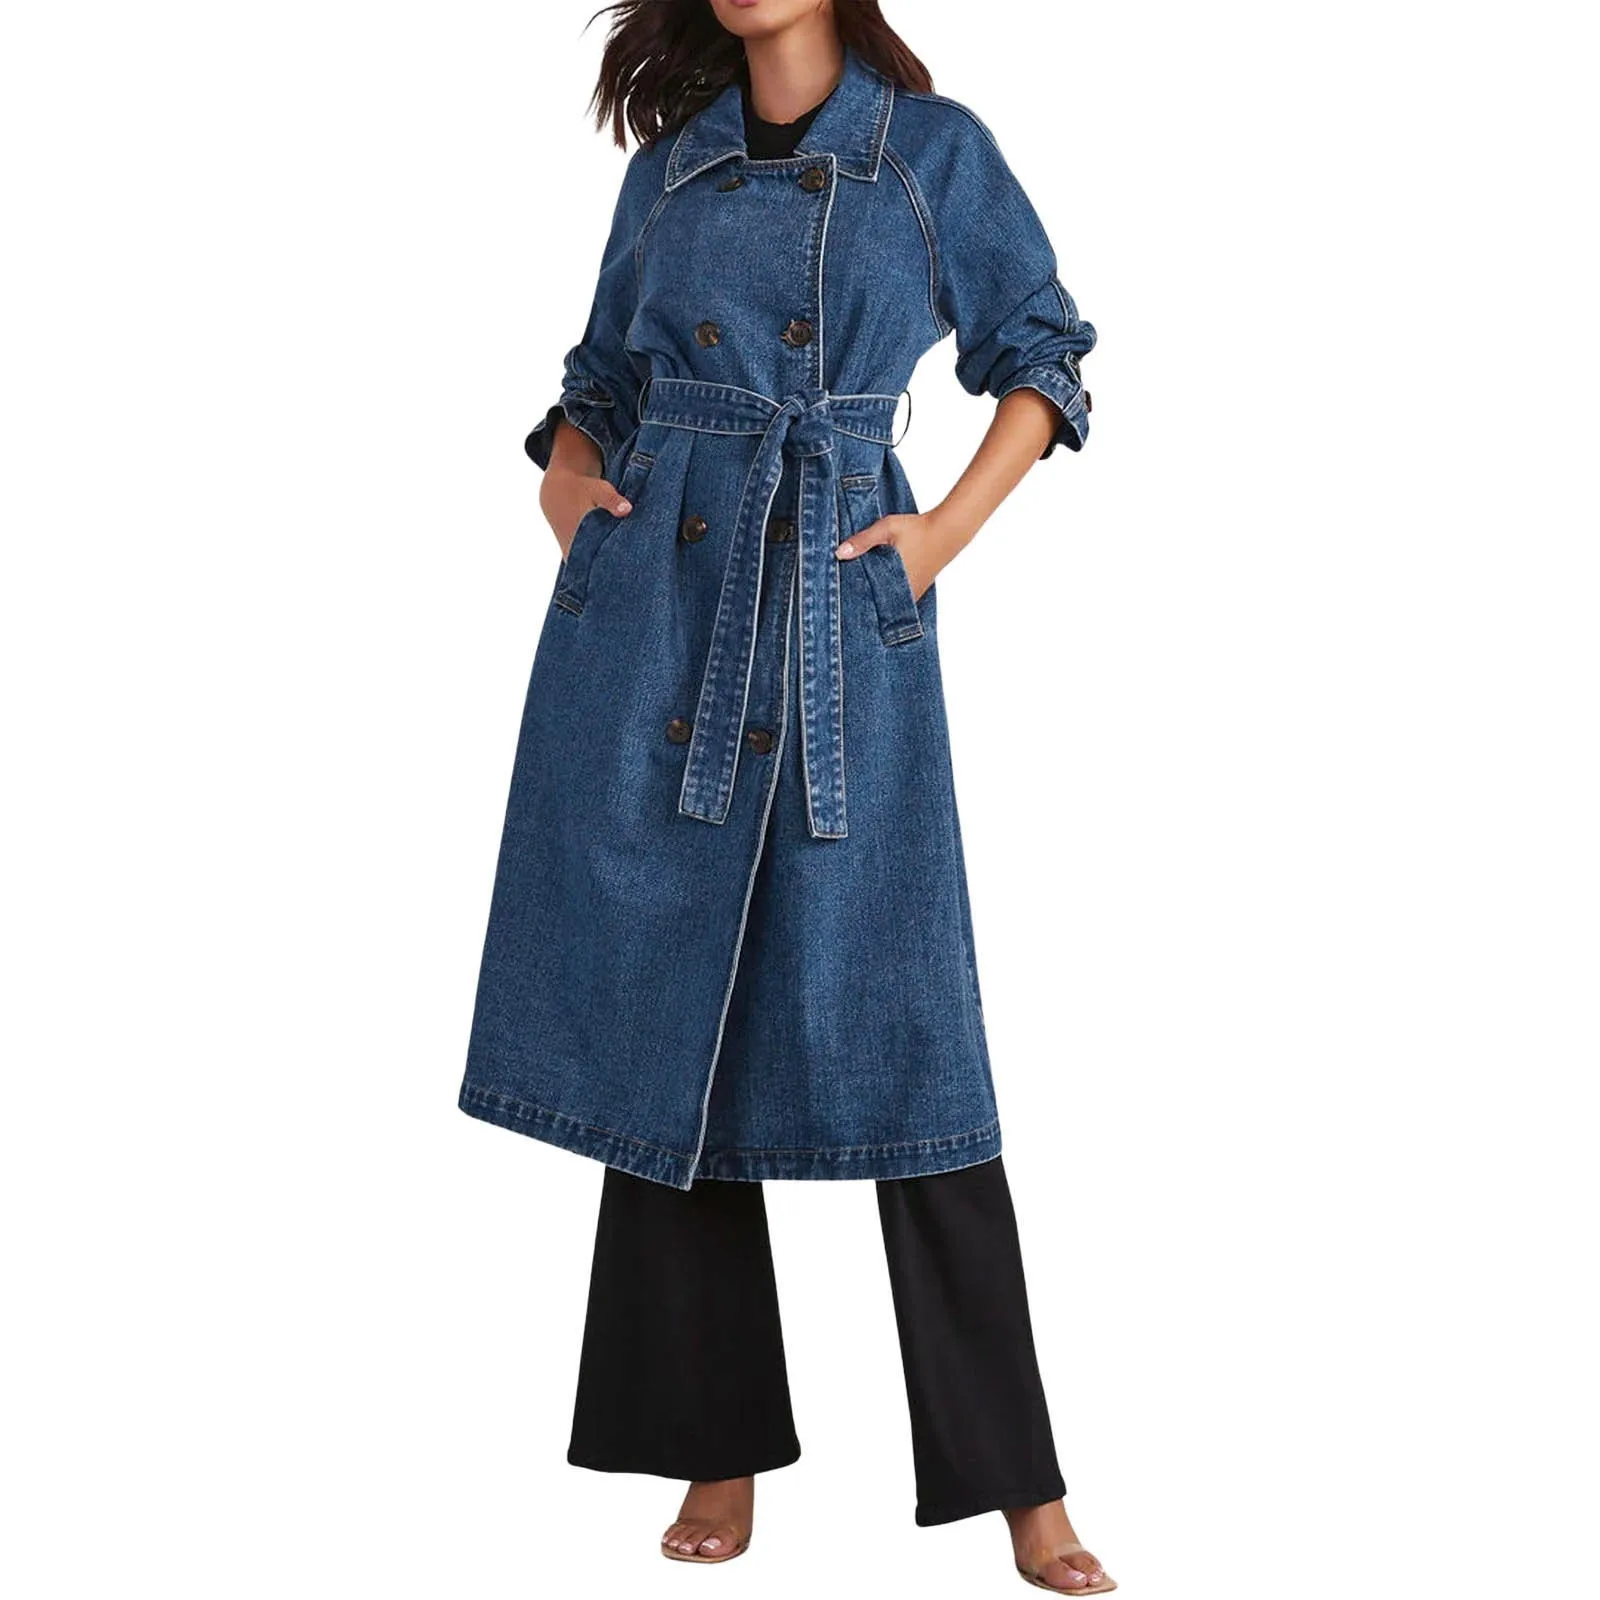 Women's Vintage Midi Long Denim Jacket - Double Breasted Trench Coat with Belt